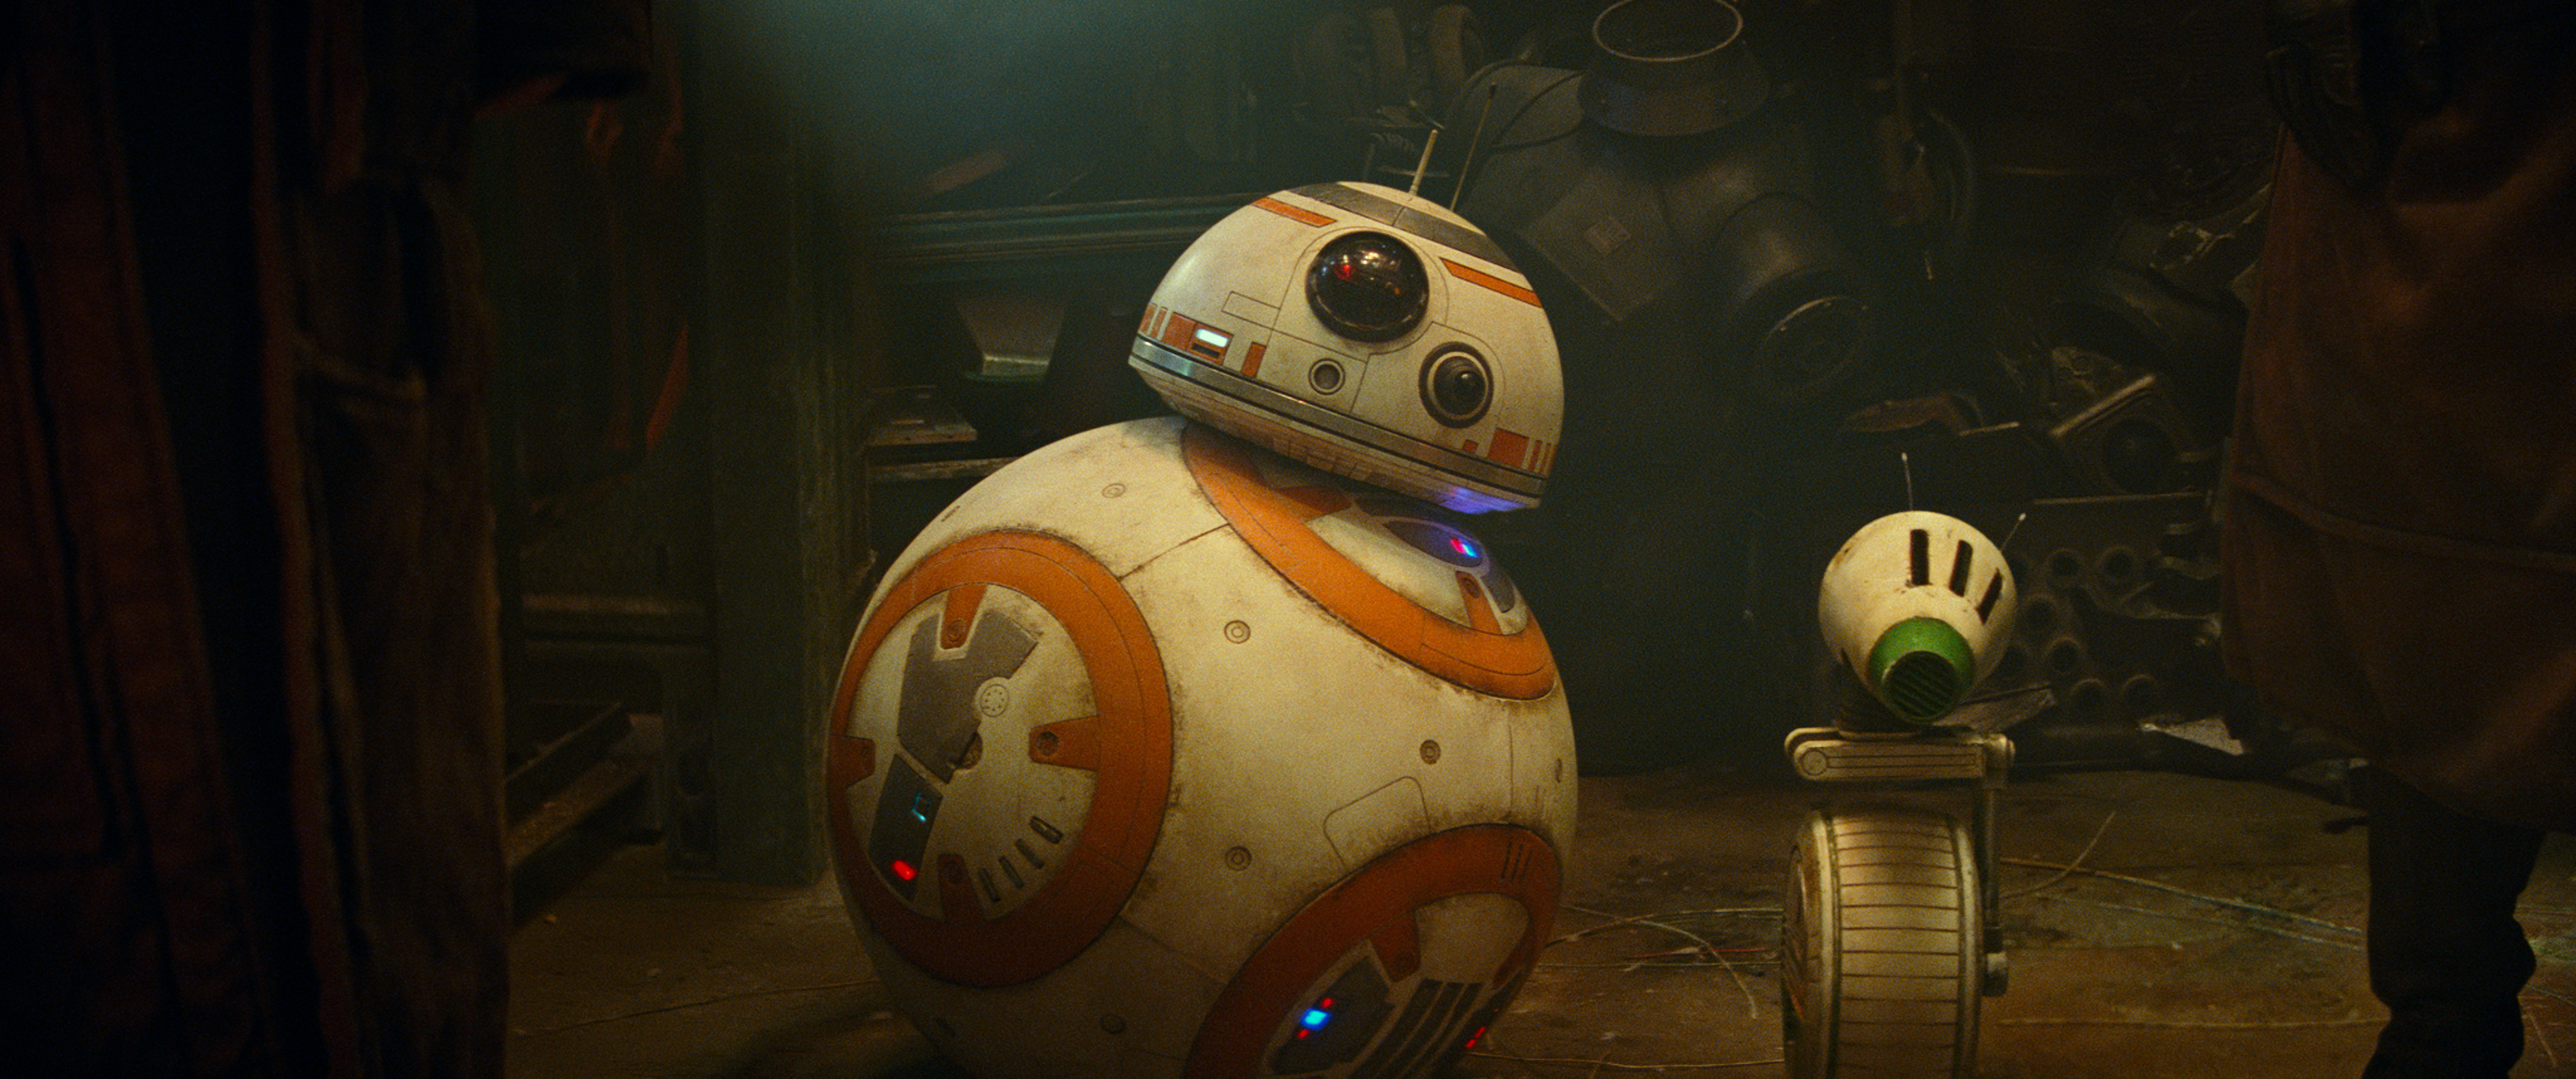 BB-8 and D-O in STAR WARS:  THE RISE OF SKYWALKER (Lucasflm Ltd.)